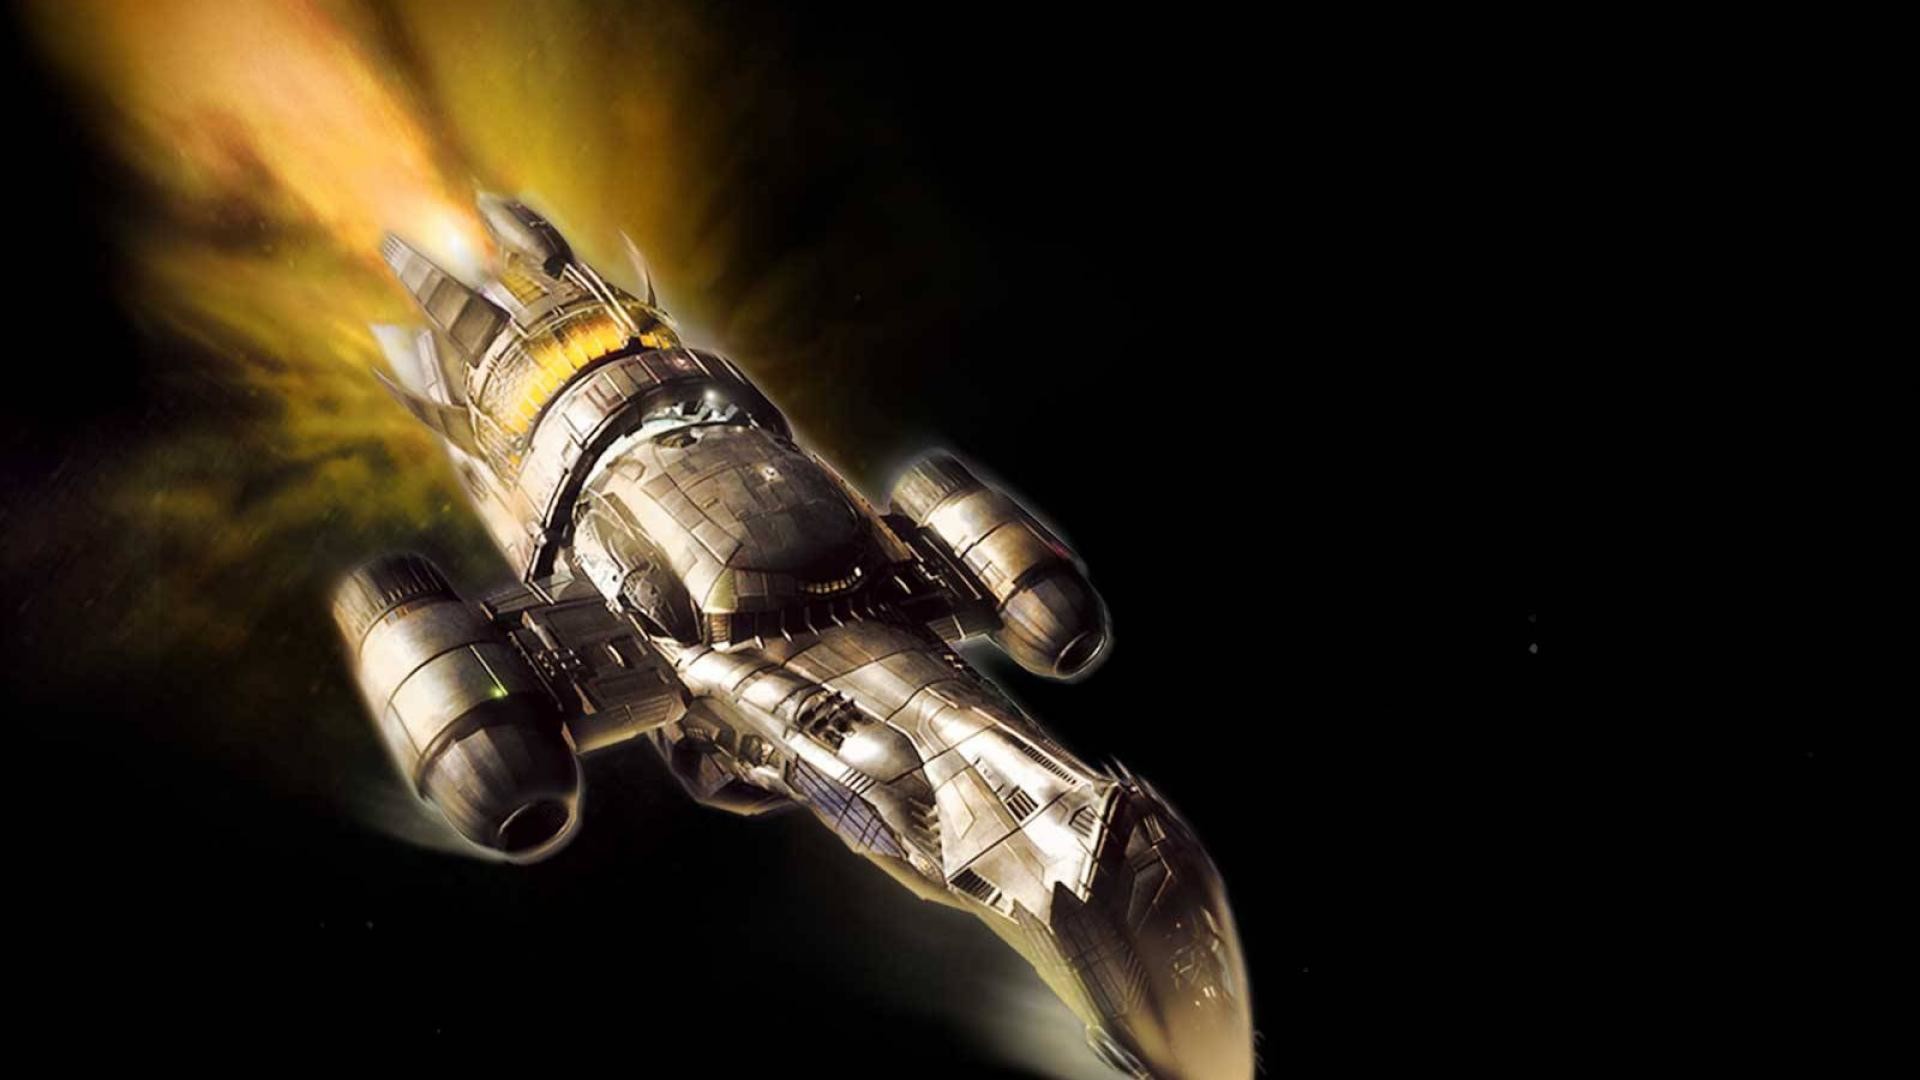 1920x1080 firefly wallpaper 19044 High Quality and Resolution Wallpapers 